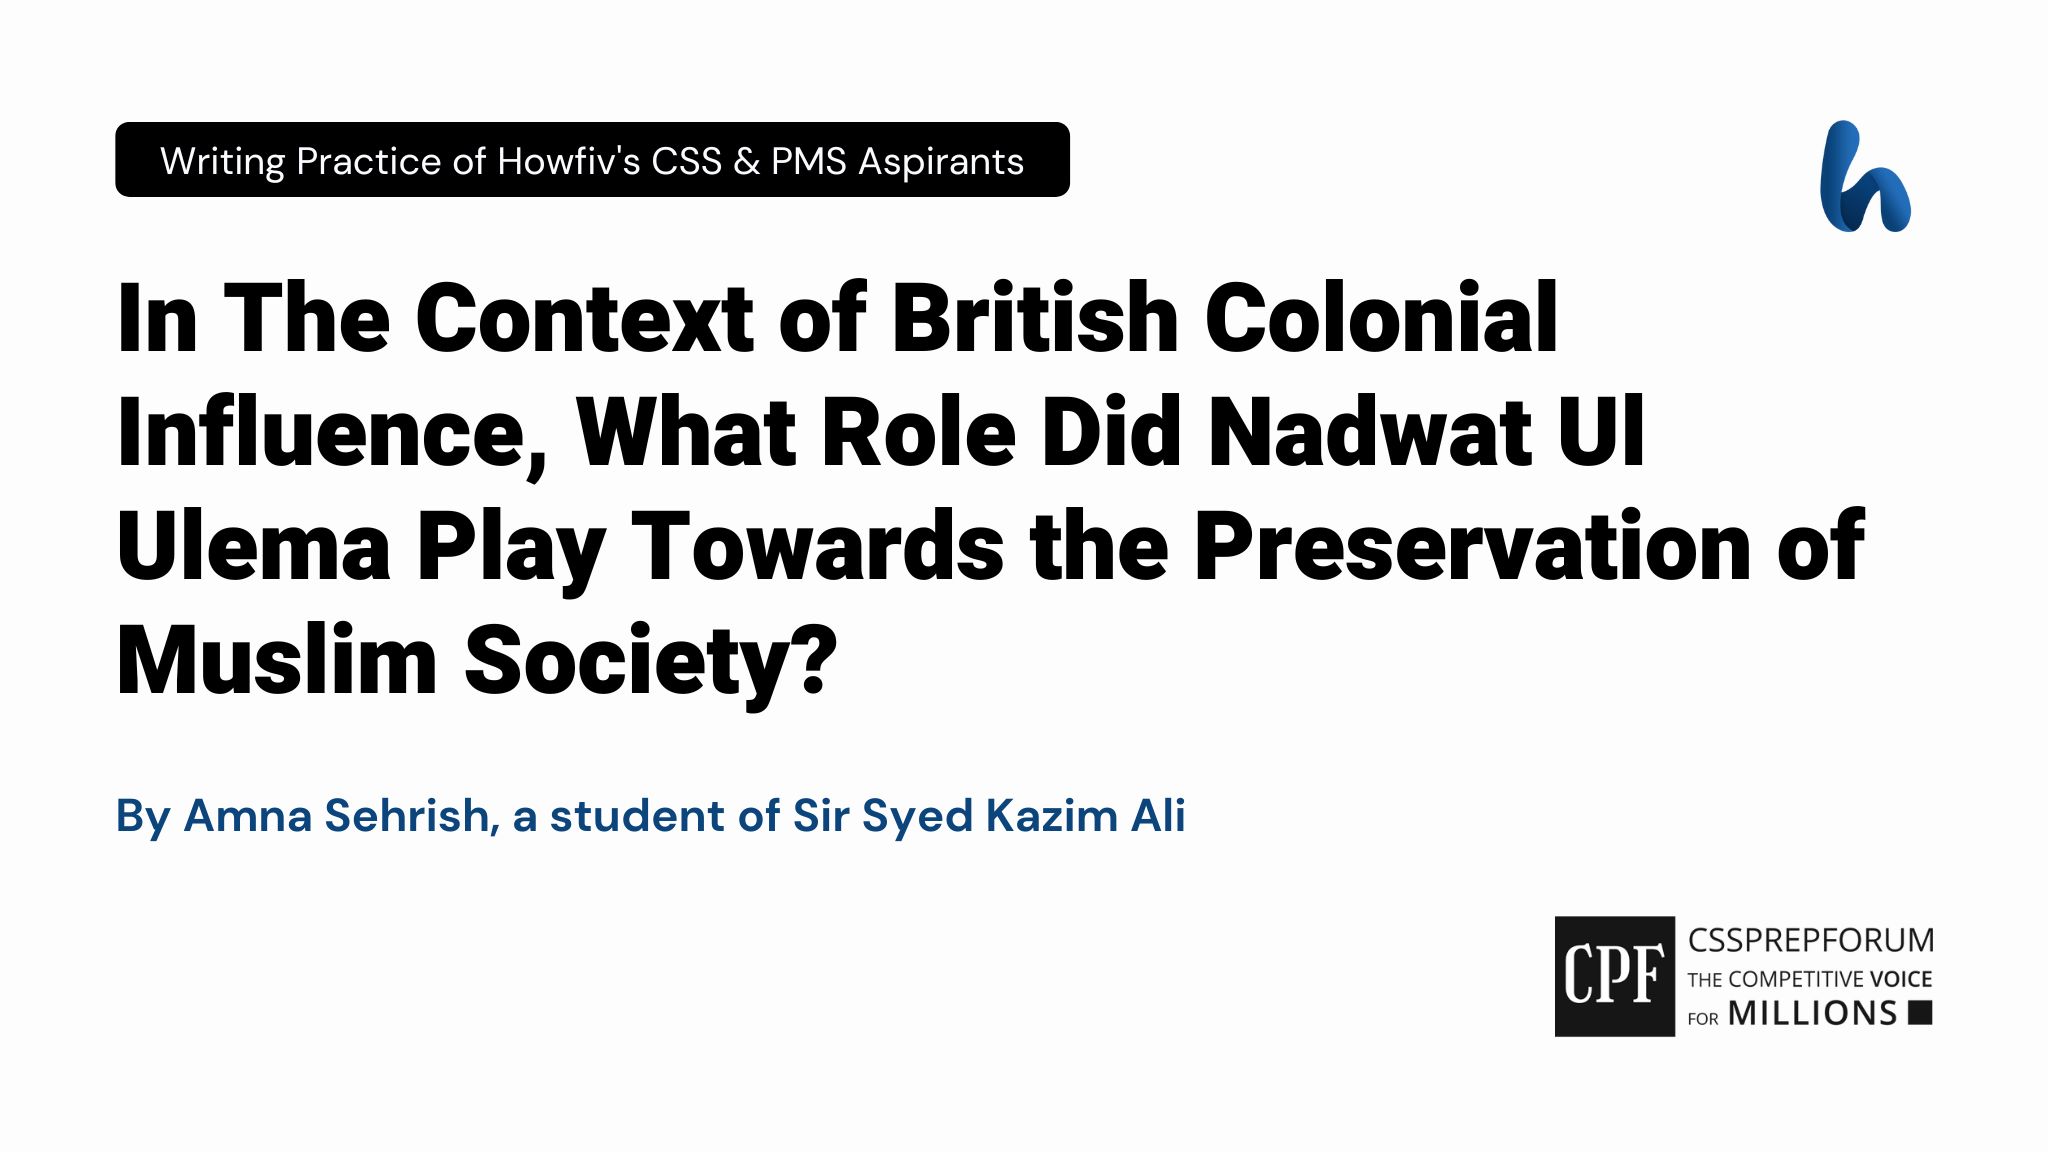 In The Context of British Colonial Influence, What Role Did Nadwat Ul Ulema Play Towards the Preservation of Muslim Society